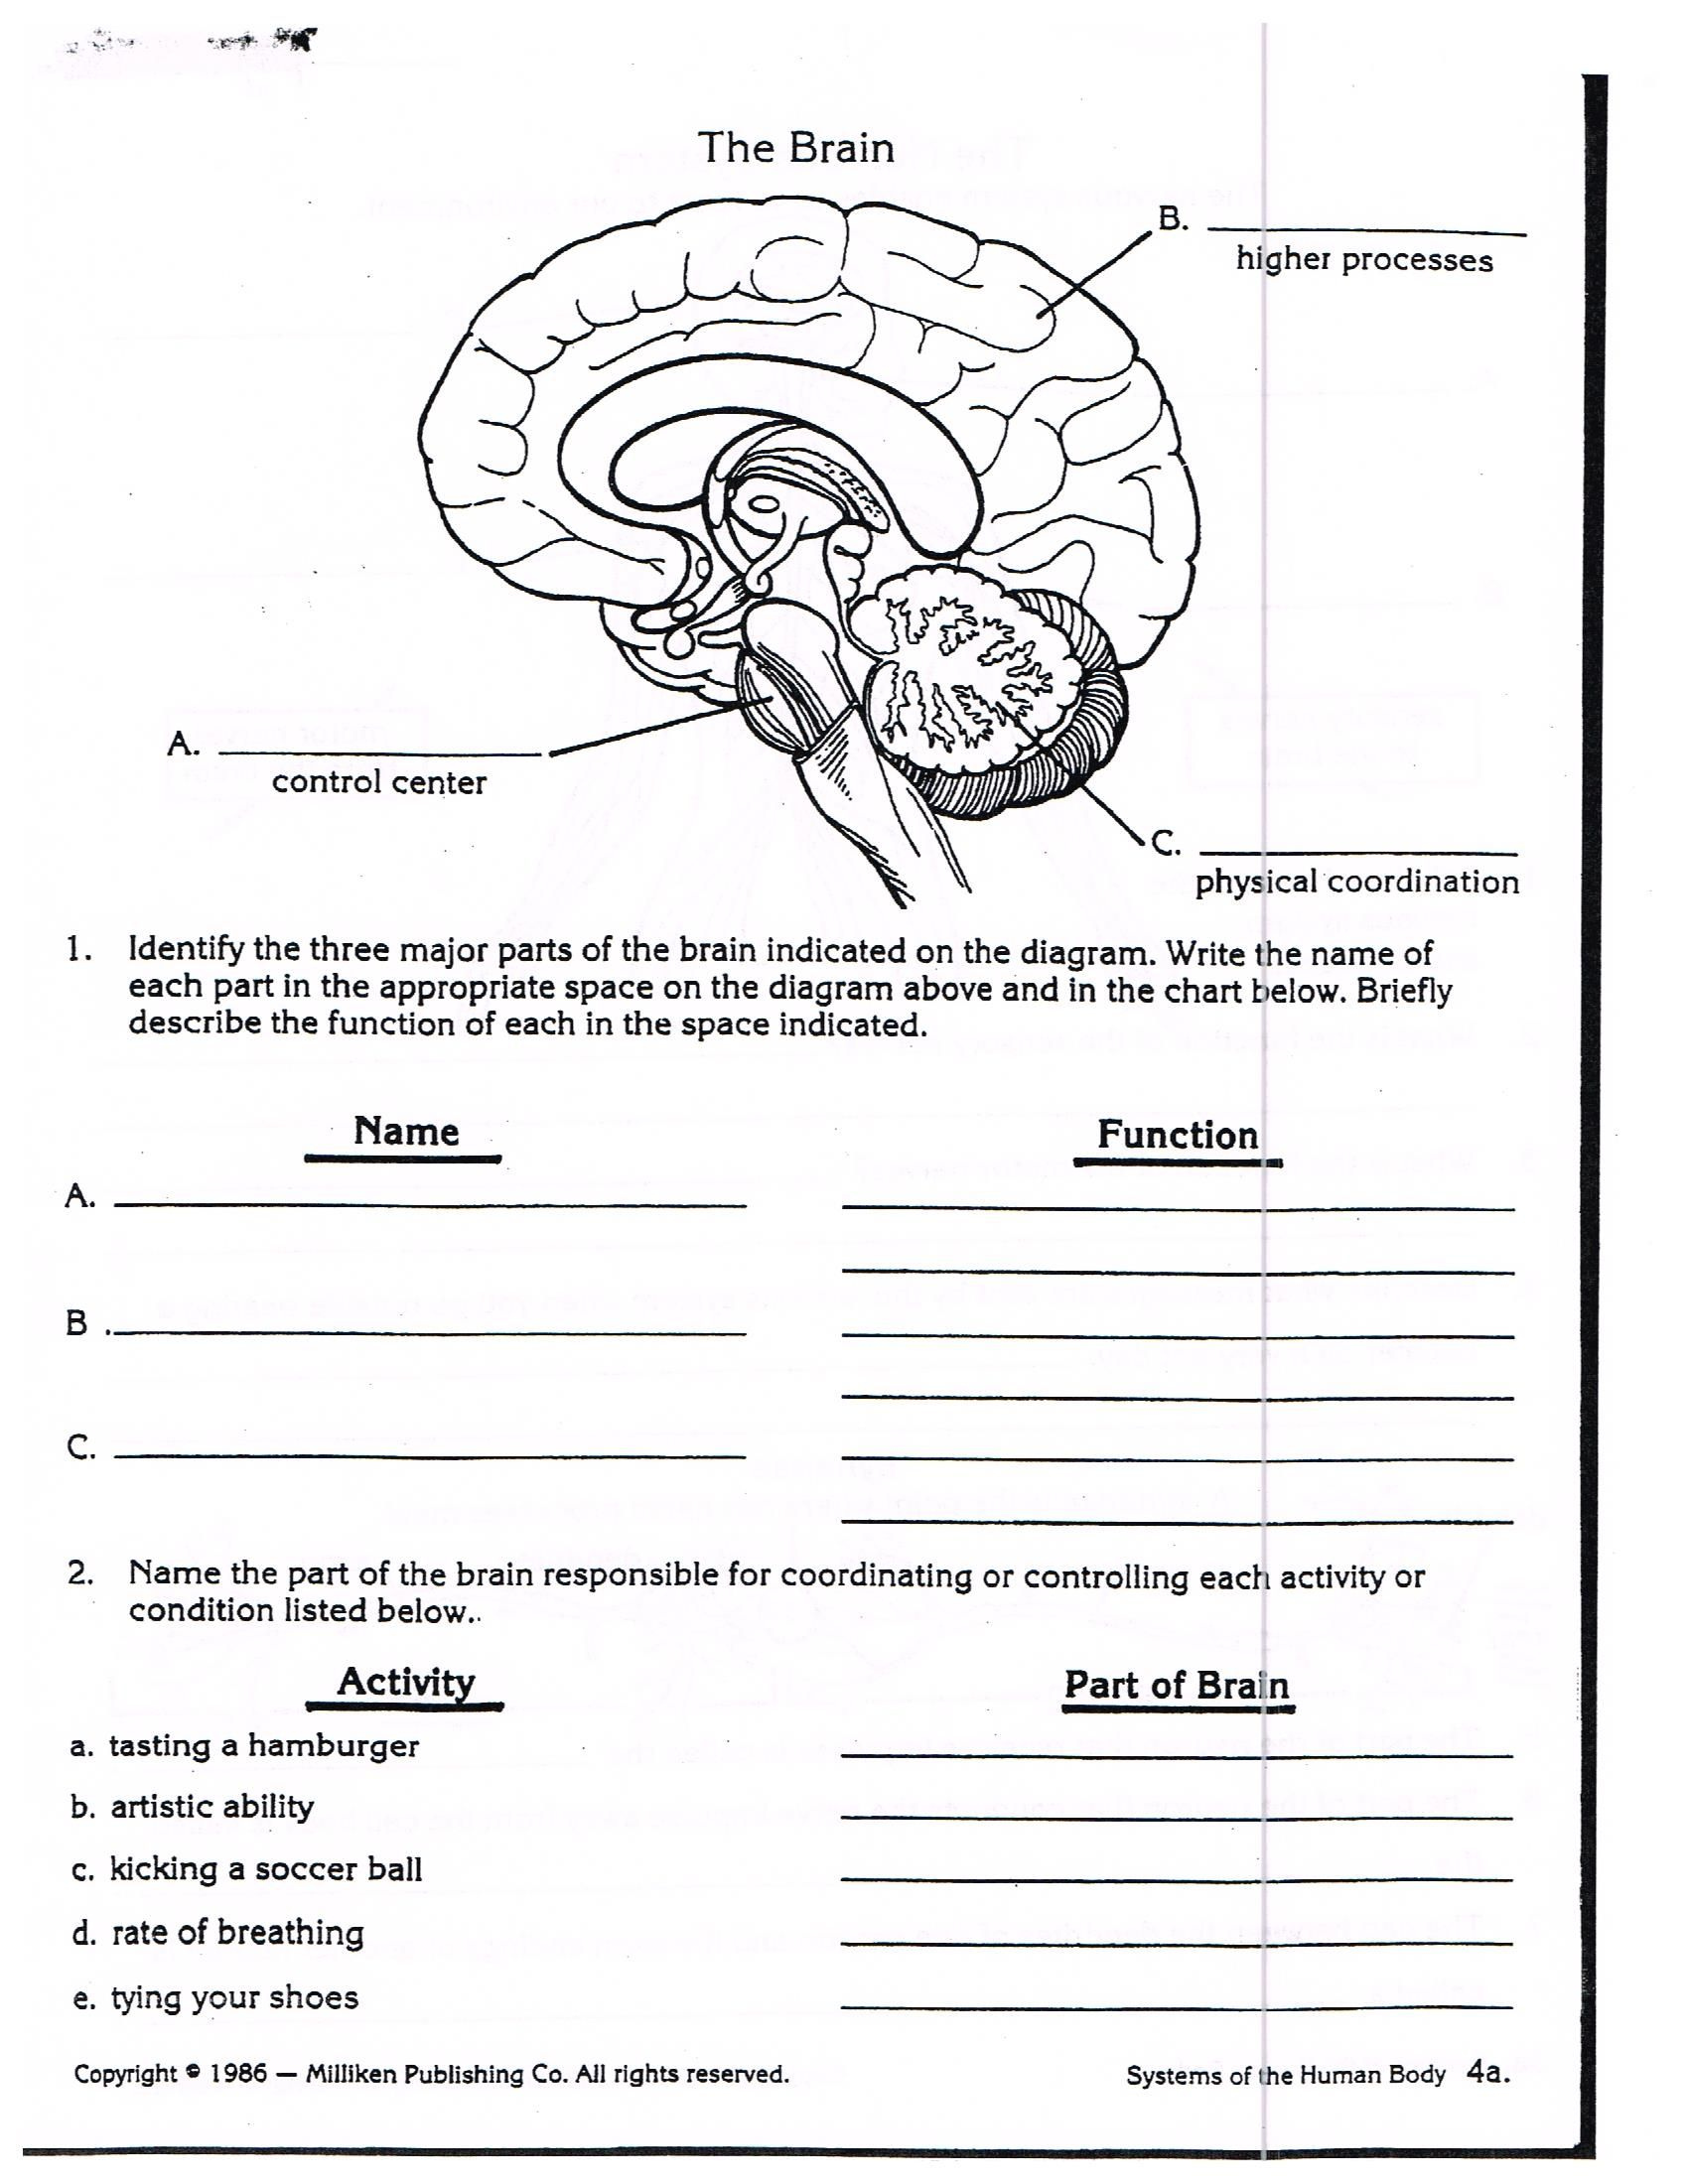 Human Body Systems The Nervous System Worksheet Answers